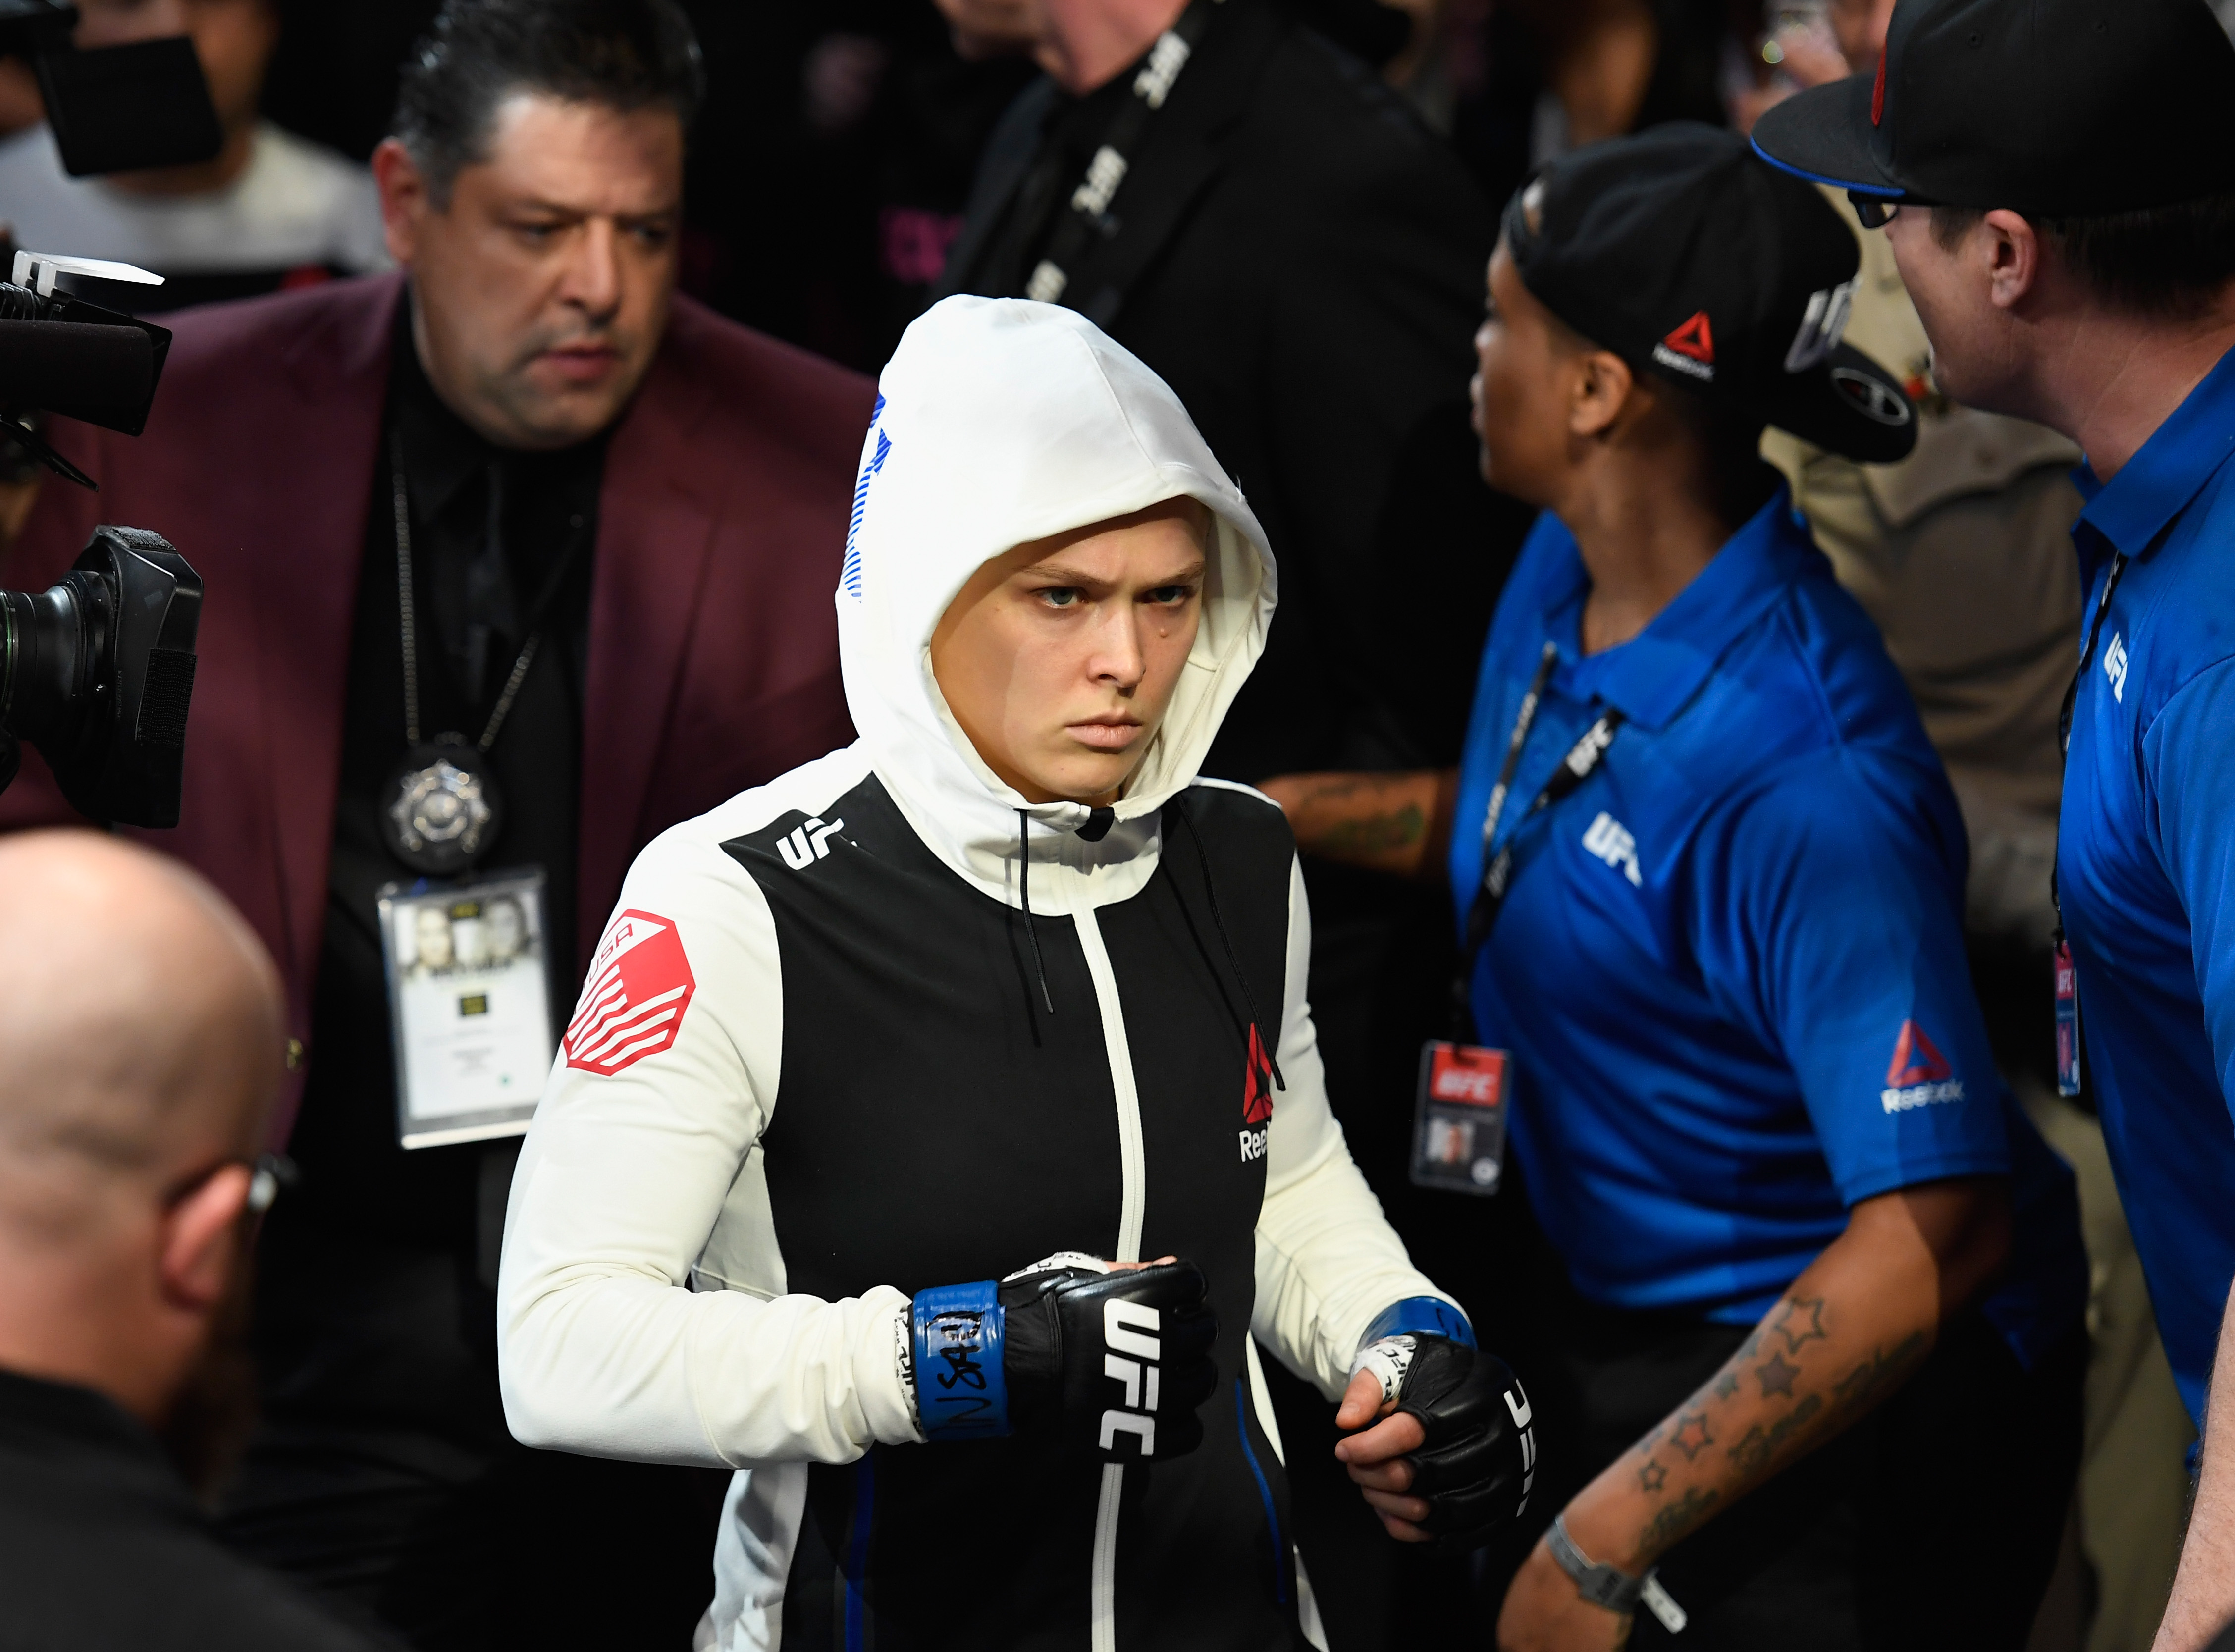 Ronda Rousey prepares to enter the Octagon for her UFC 207 title fight with Amanda Nunes in 2016.